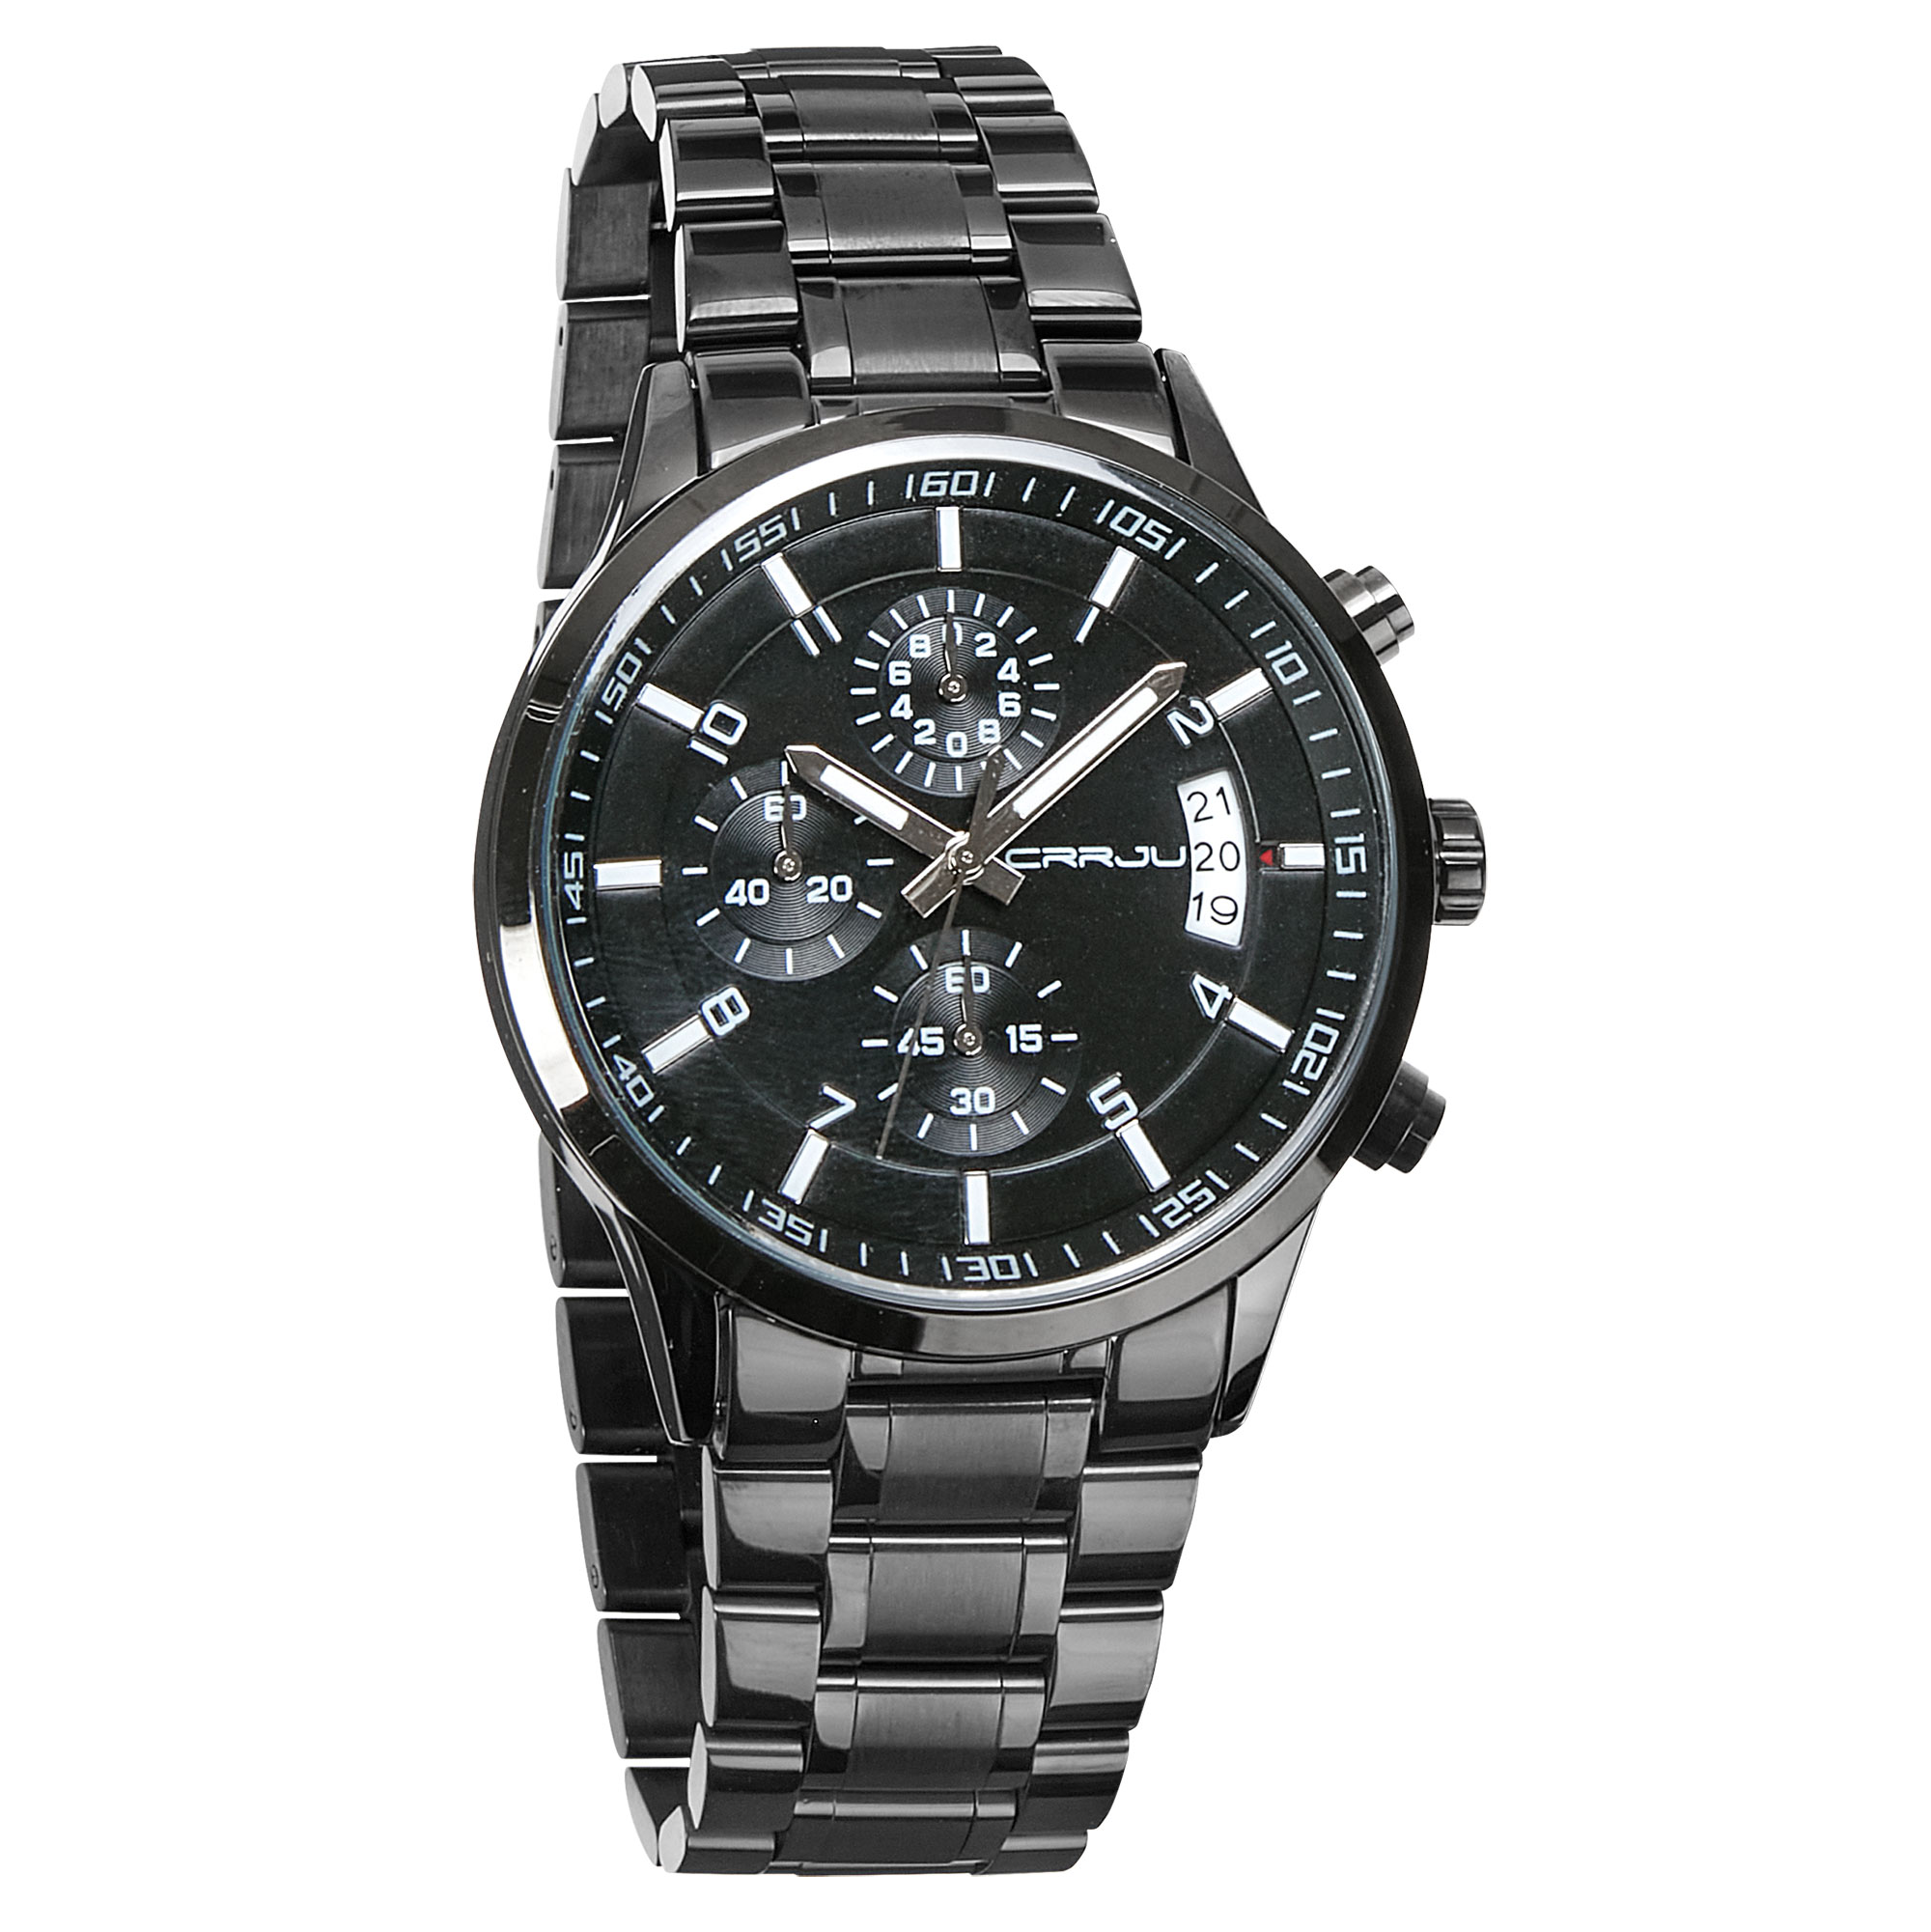 Men's Black Stainless Steel Chronograph Watch  Sy 4 i i 